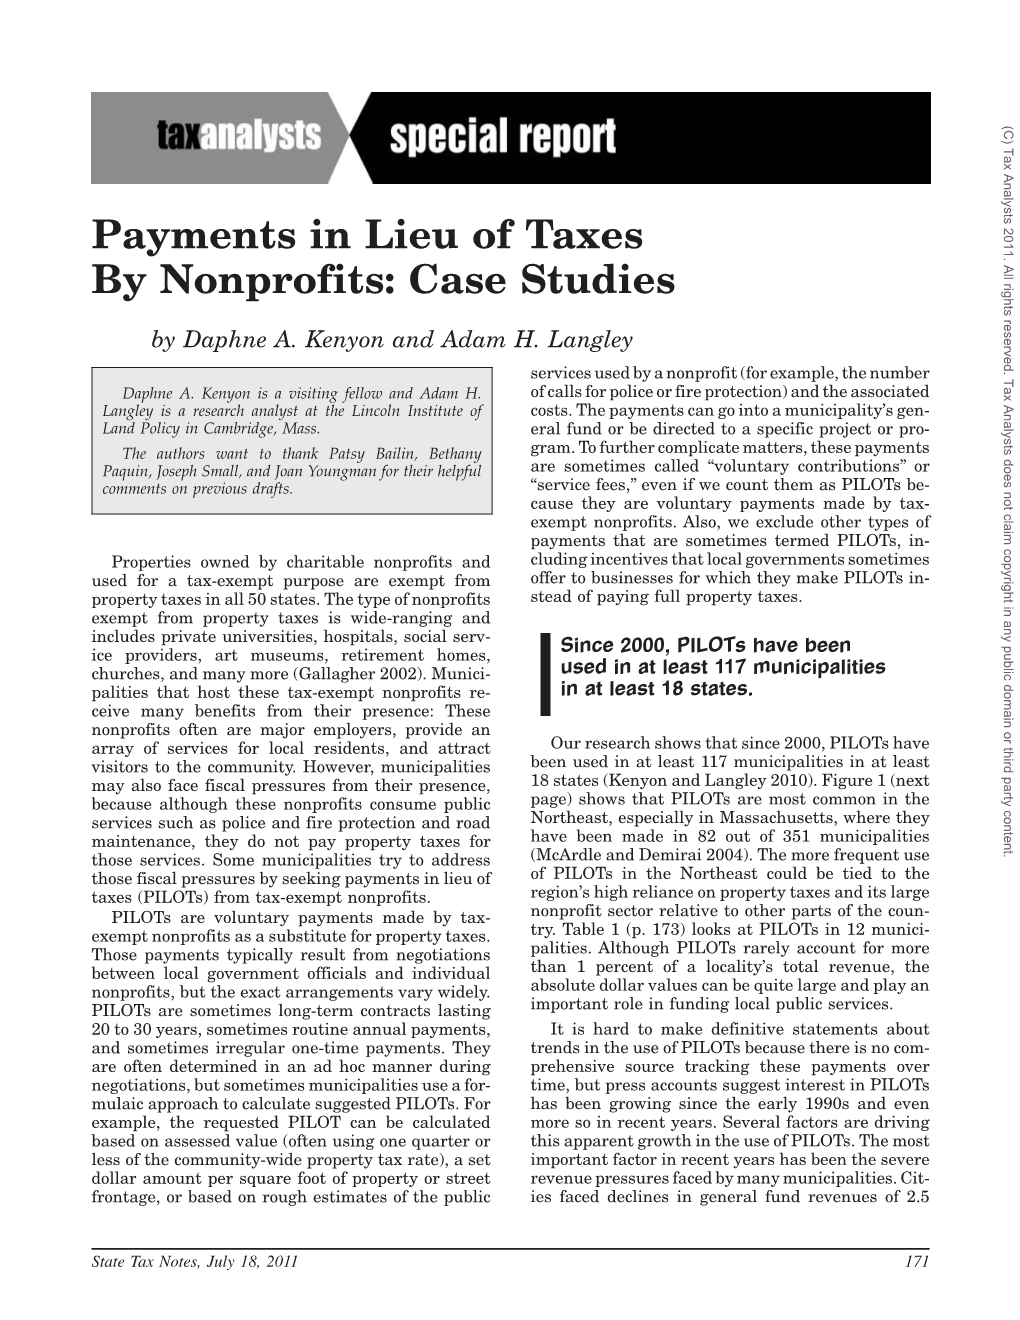 Payments in Lieu of Taxes by Nonprofits: Case Studies